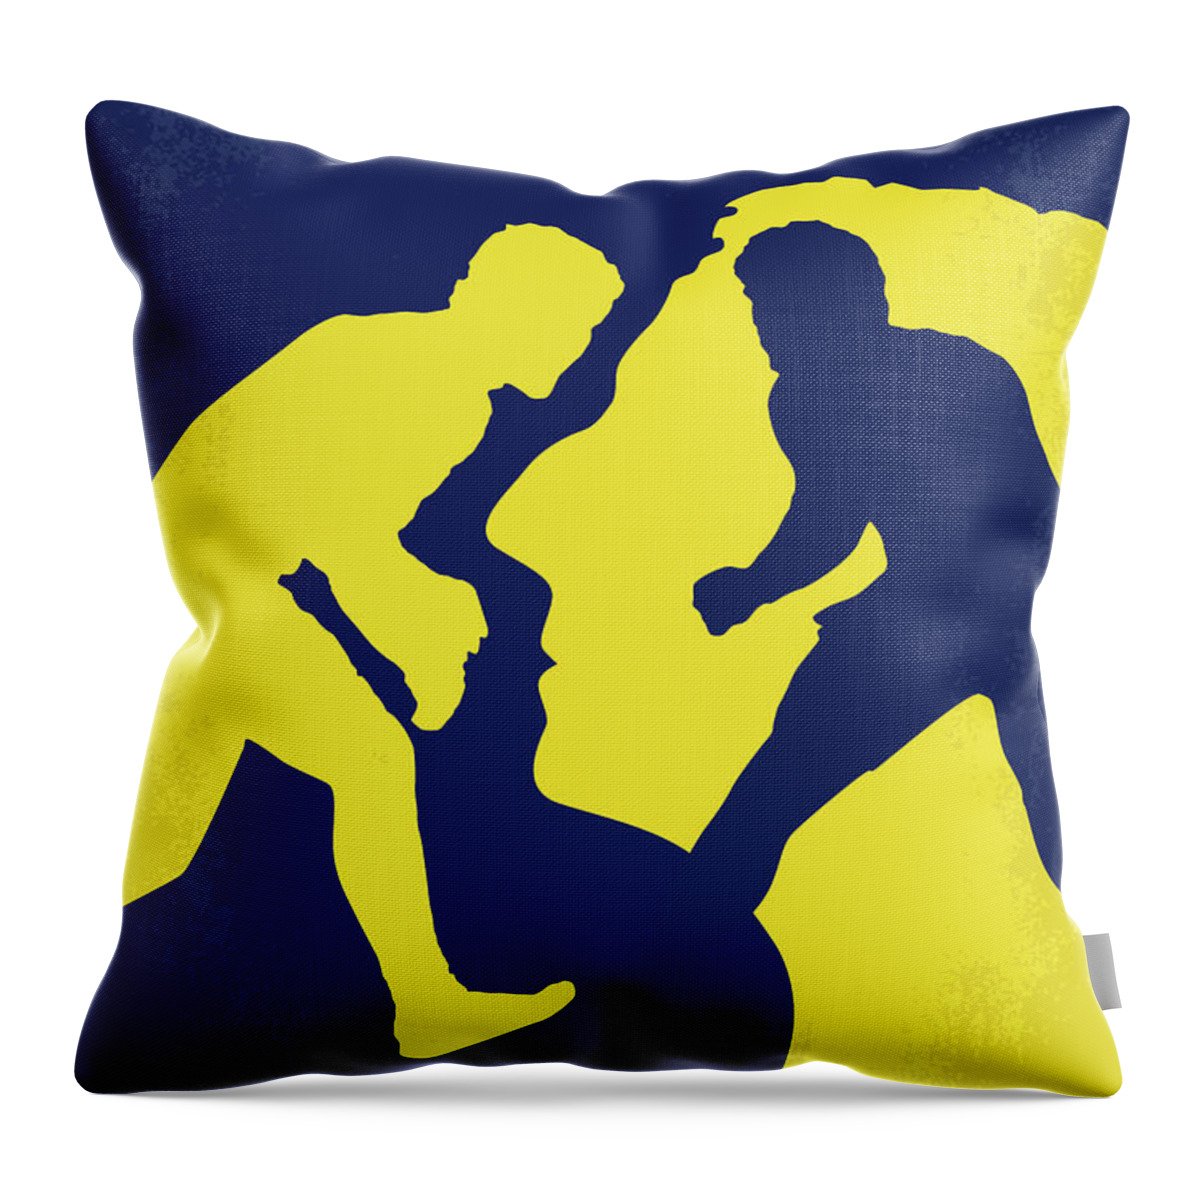 Foxcatcher Throw Pillow featuring the digital art No788 My Foxcatcher minimal movie poster by Chungkong Art